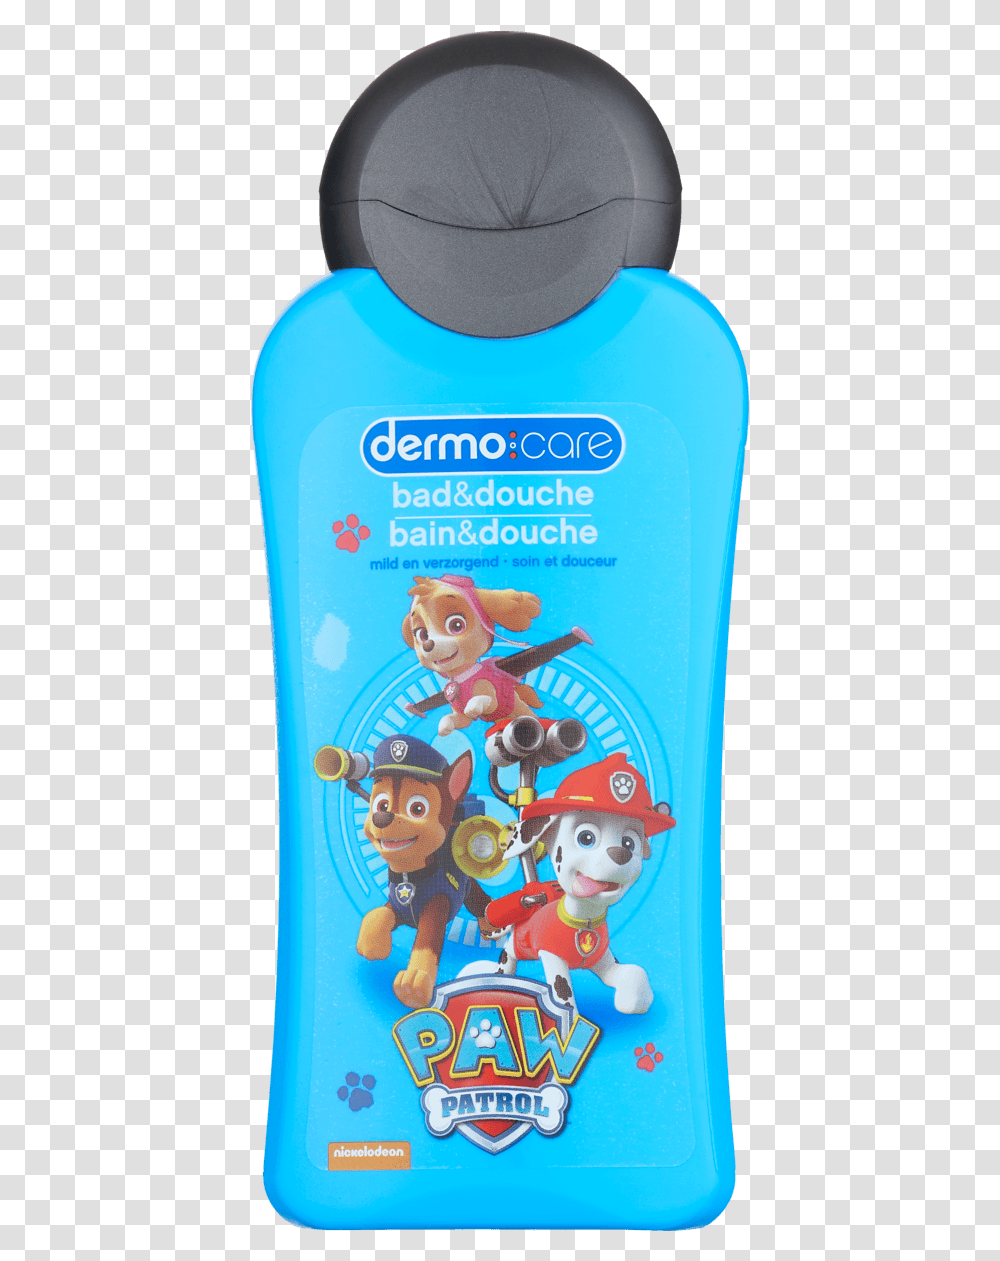 Dermo Care Paw Patrol 2 In 1 Bad En Douche Water Bottle, Sunscreen, Cosmetics, Shampoo Transparent Png